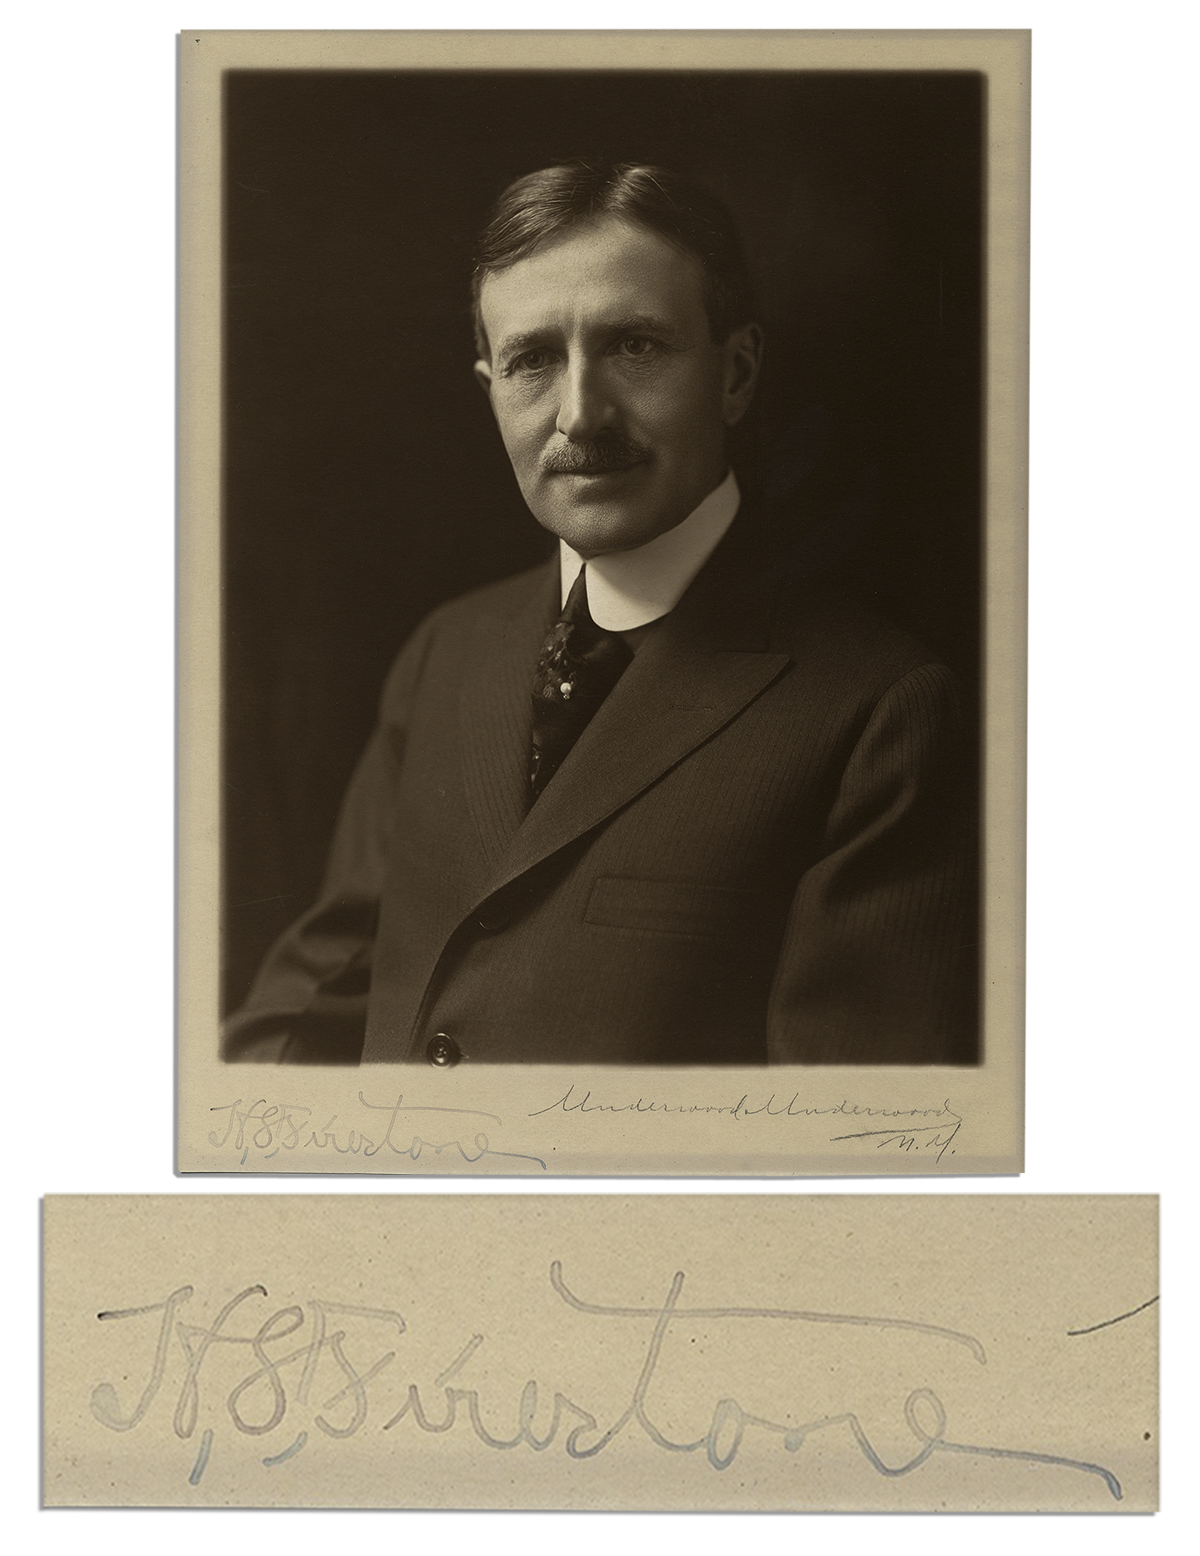 Vintage portrait photo signed by its wealthy subject upon the lower border, ''H.S. Firestone''.